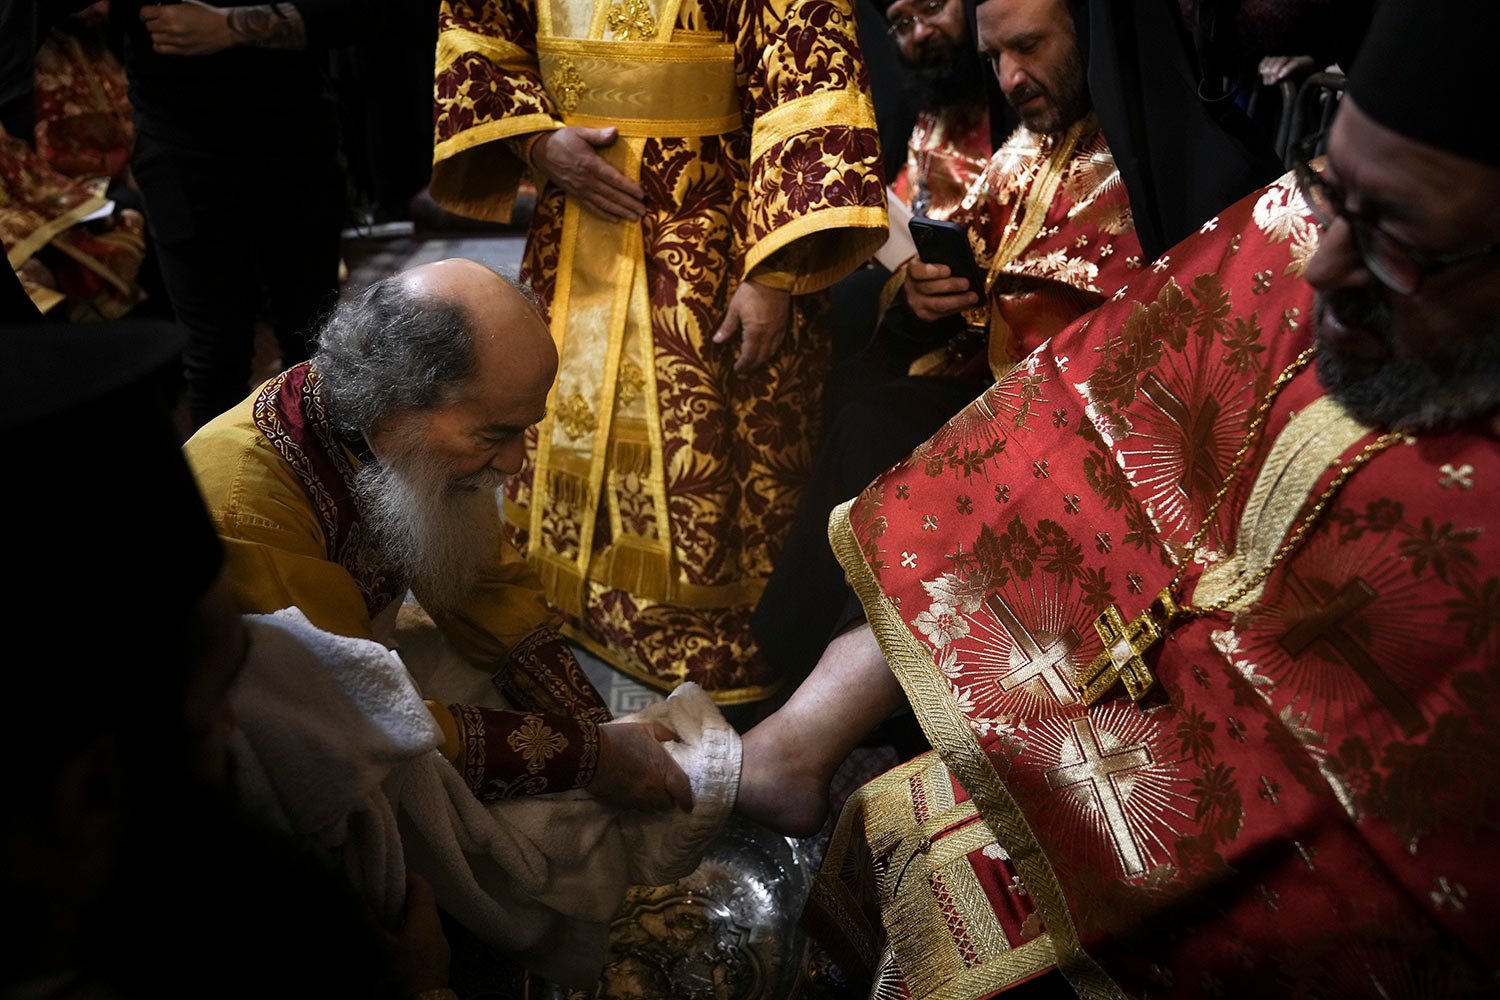  Patriarch Theophilos III, the Greek Orthodox Patriarch of Jerusalem, left, performs the Washing of the Feet ceremony during Holy Week, at the Church of the Holy Sepulcher, where many Christians believe Jesus was crucified, buried and rose from the d